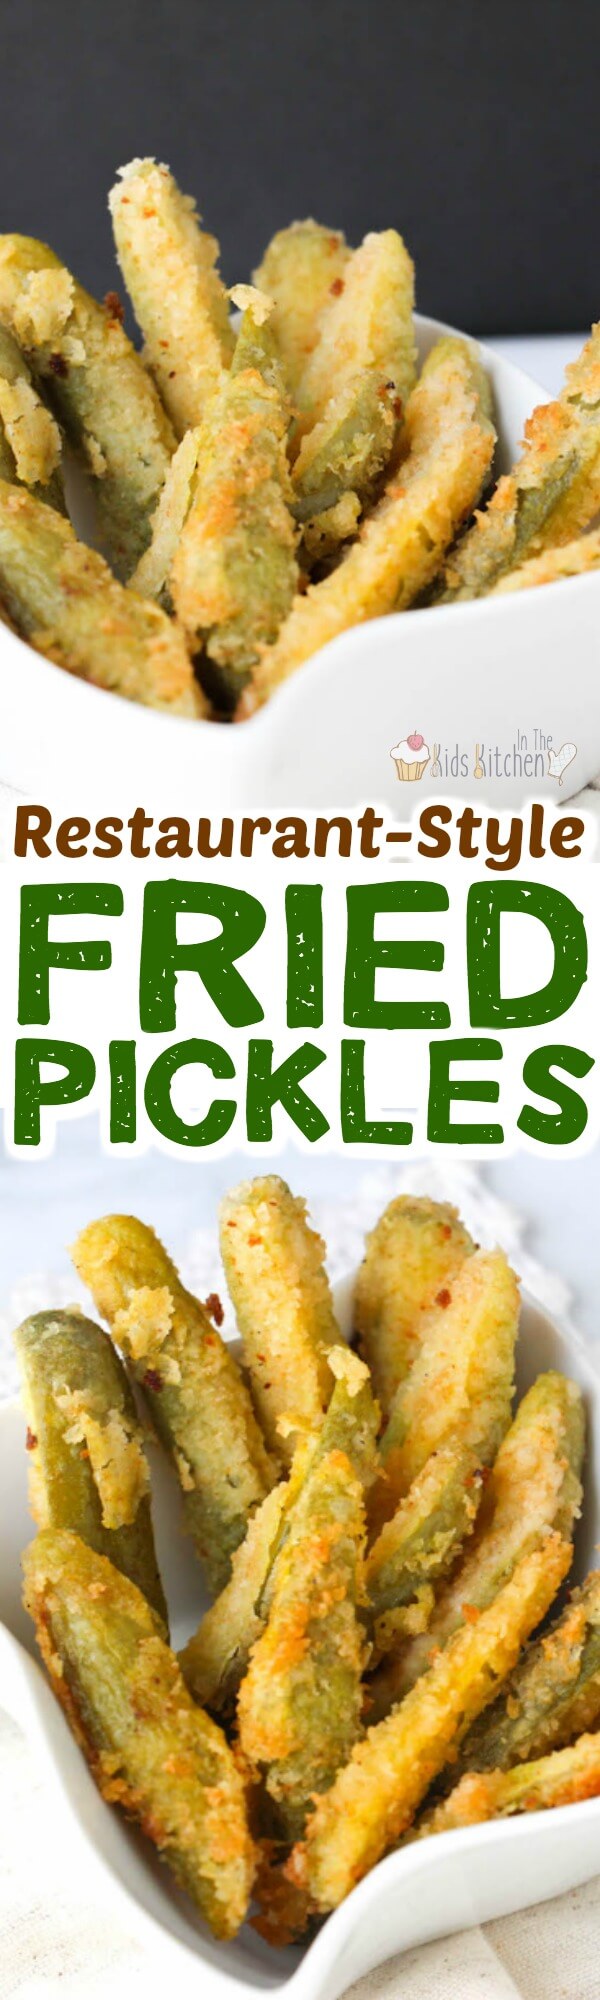 Make easy fried pickles at home - just like restaurants! A southern treat, fried dill pickle spears make the perfect unique party appetizer or snack! #appetizer #pickles